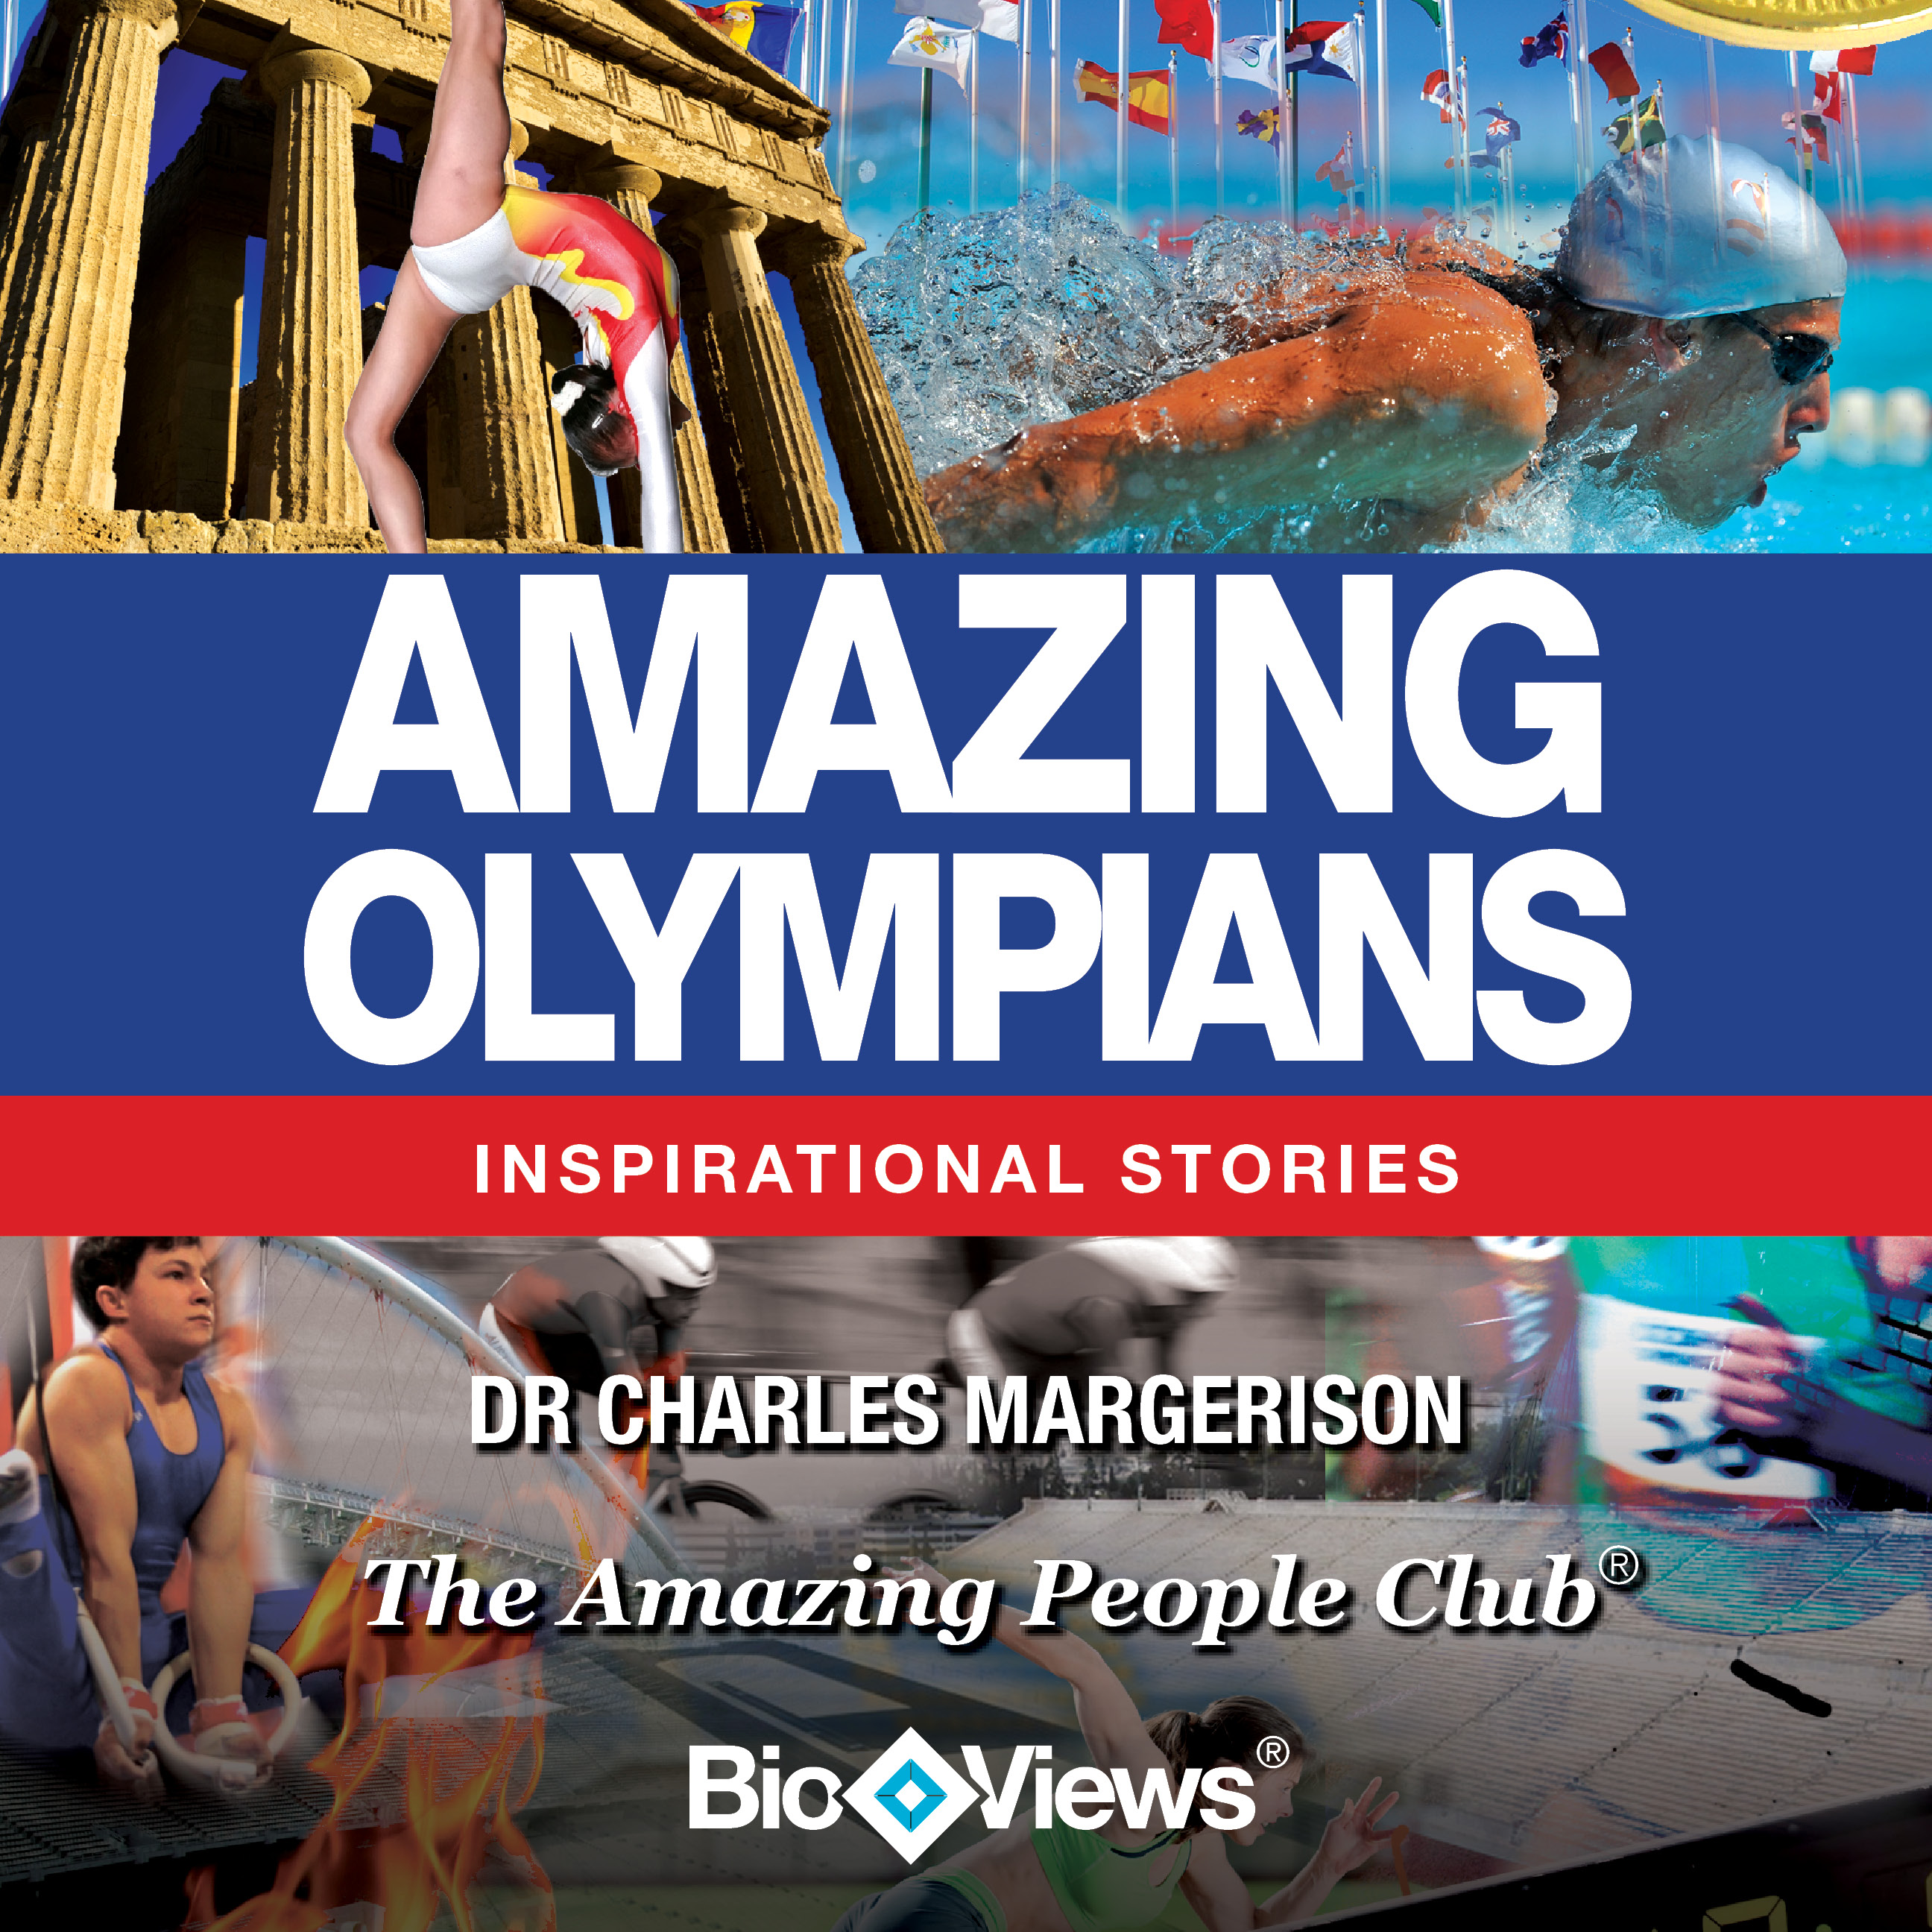 Amazing Olympians: Inspirational Stories Audiobook, by Charles Margerison